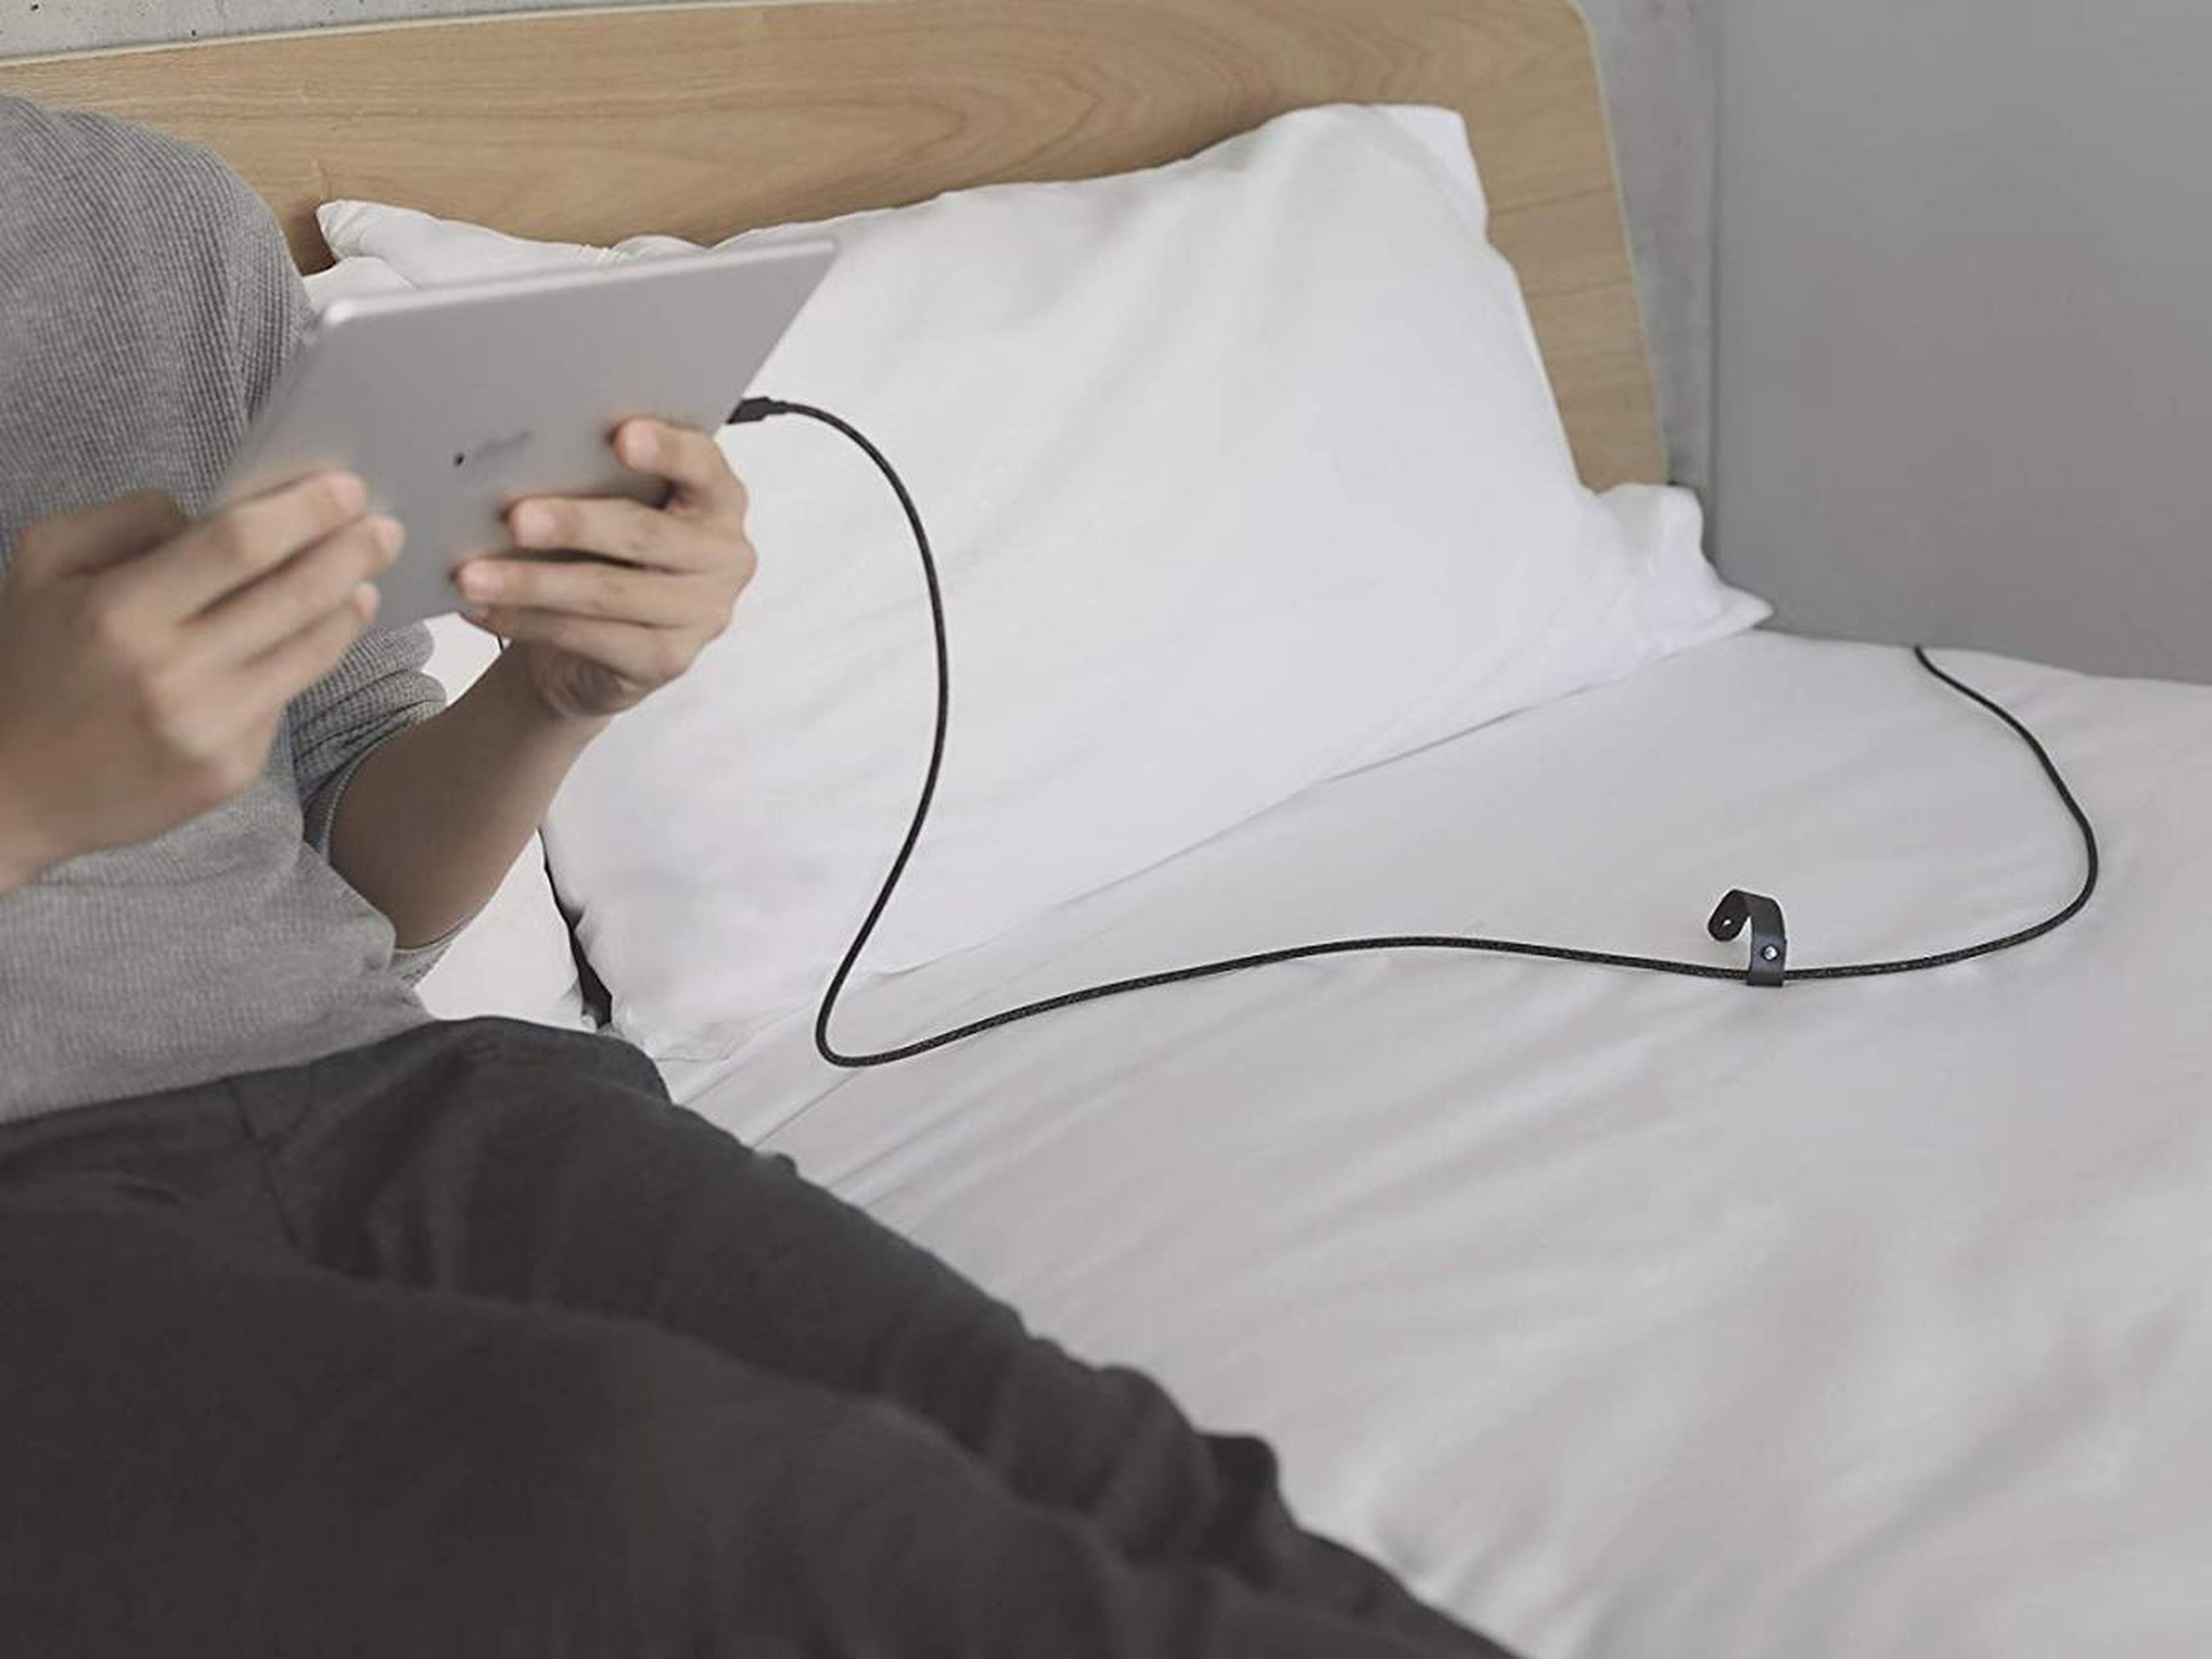 A hyper-useful extra-long, reinforced phone charger